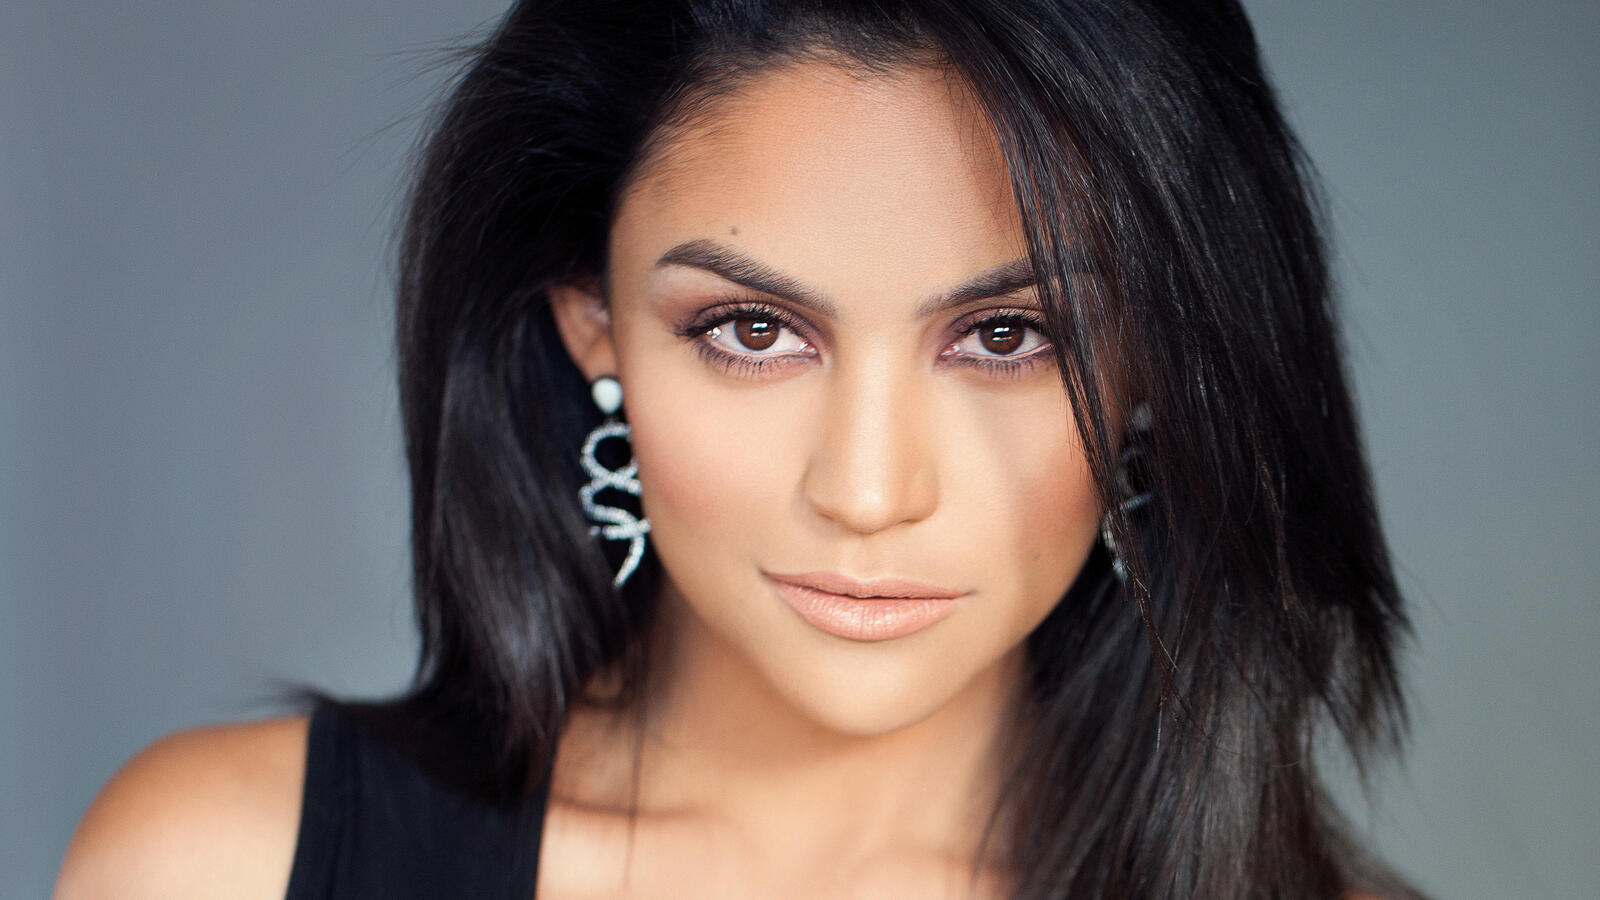 Free photo Bianca Santos with black hair and big earrings